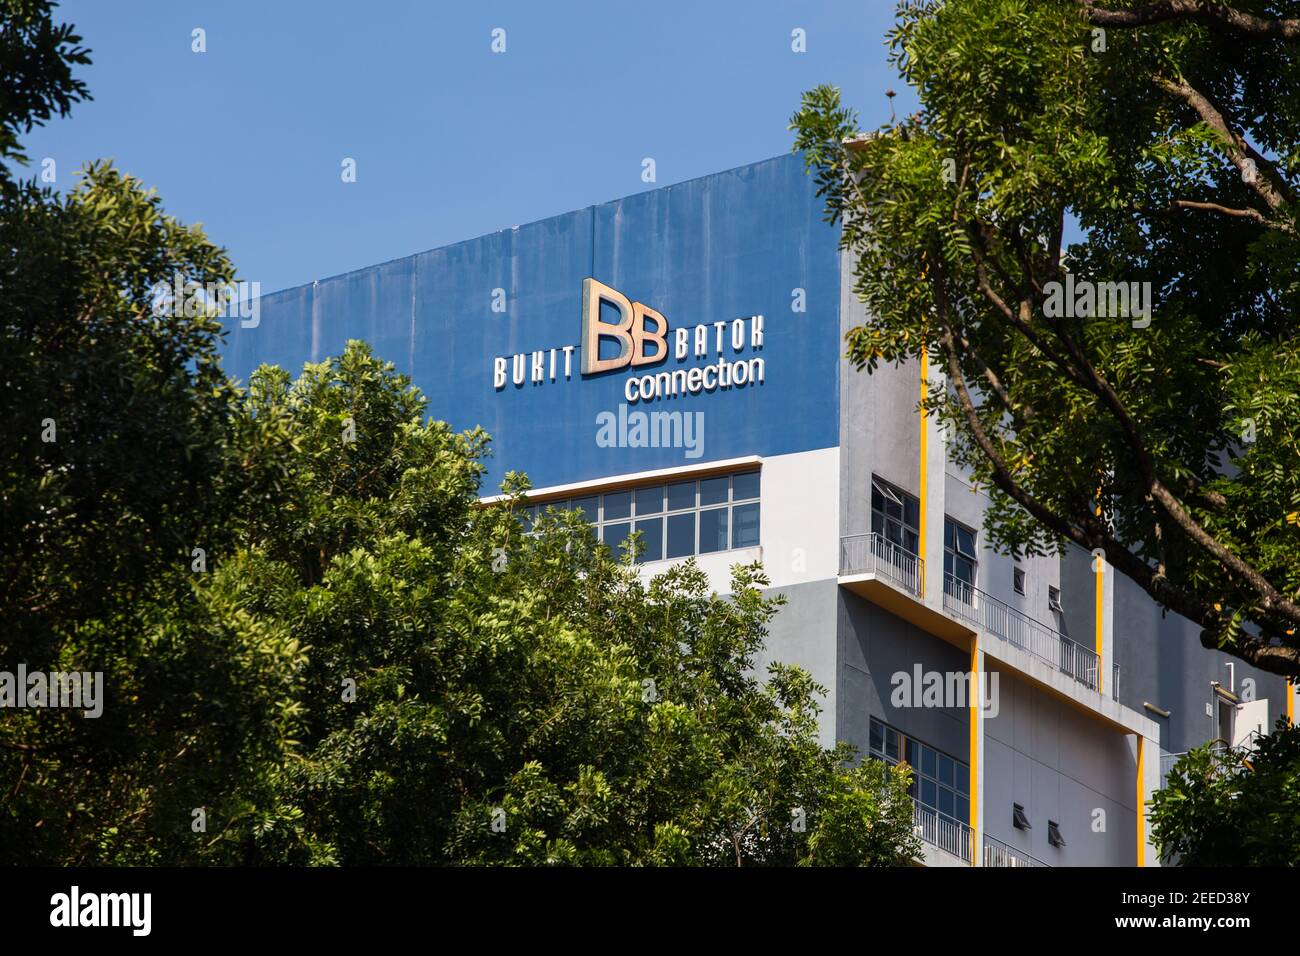 Close up view of Bukit Batok Connection logo of a light industrial factory, Singapore Stock Photo